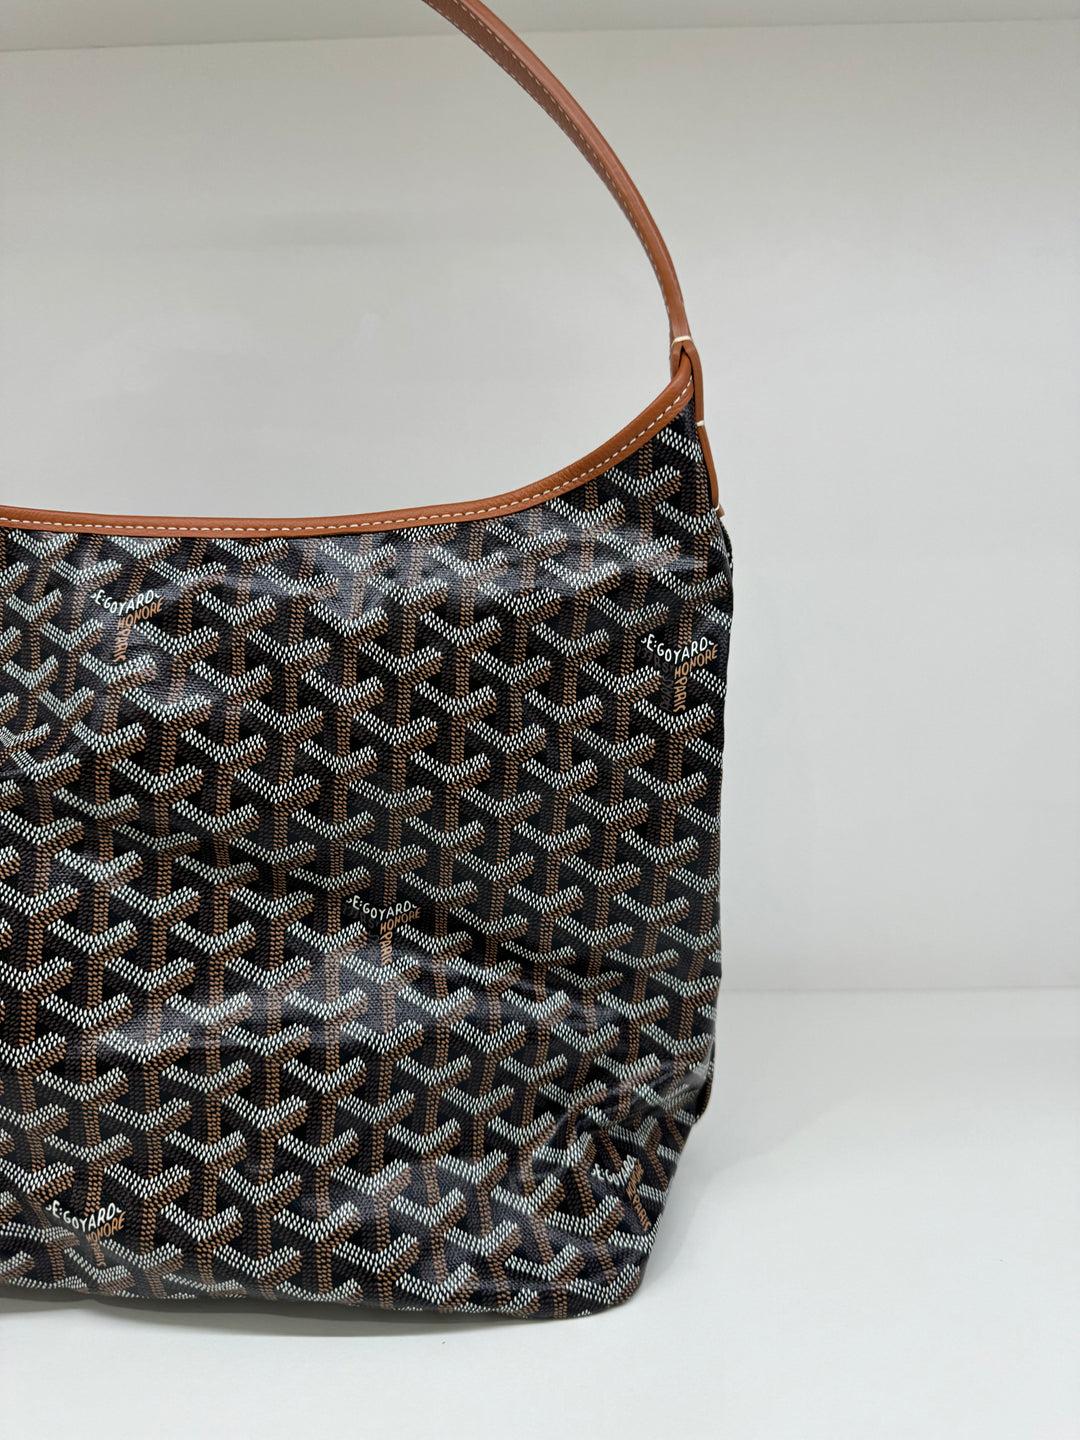 Goyard Hobo Bag In New Condition For Sale In Double Bay, AU